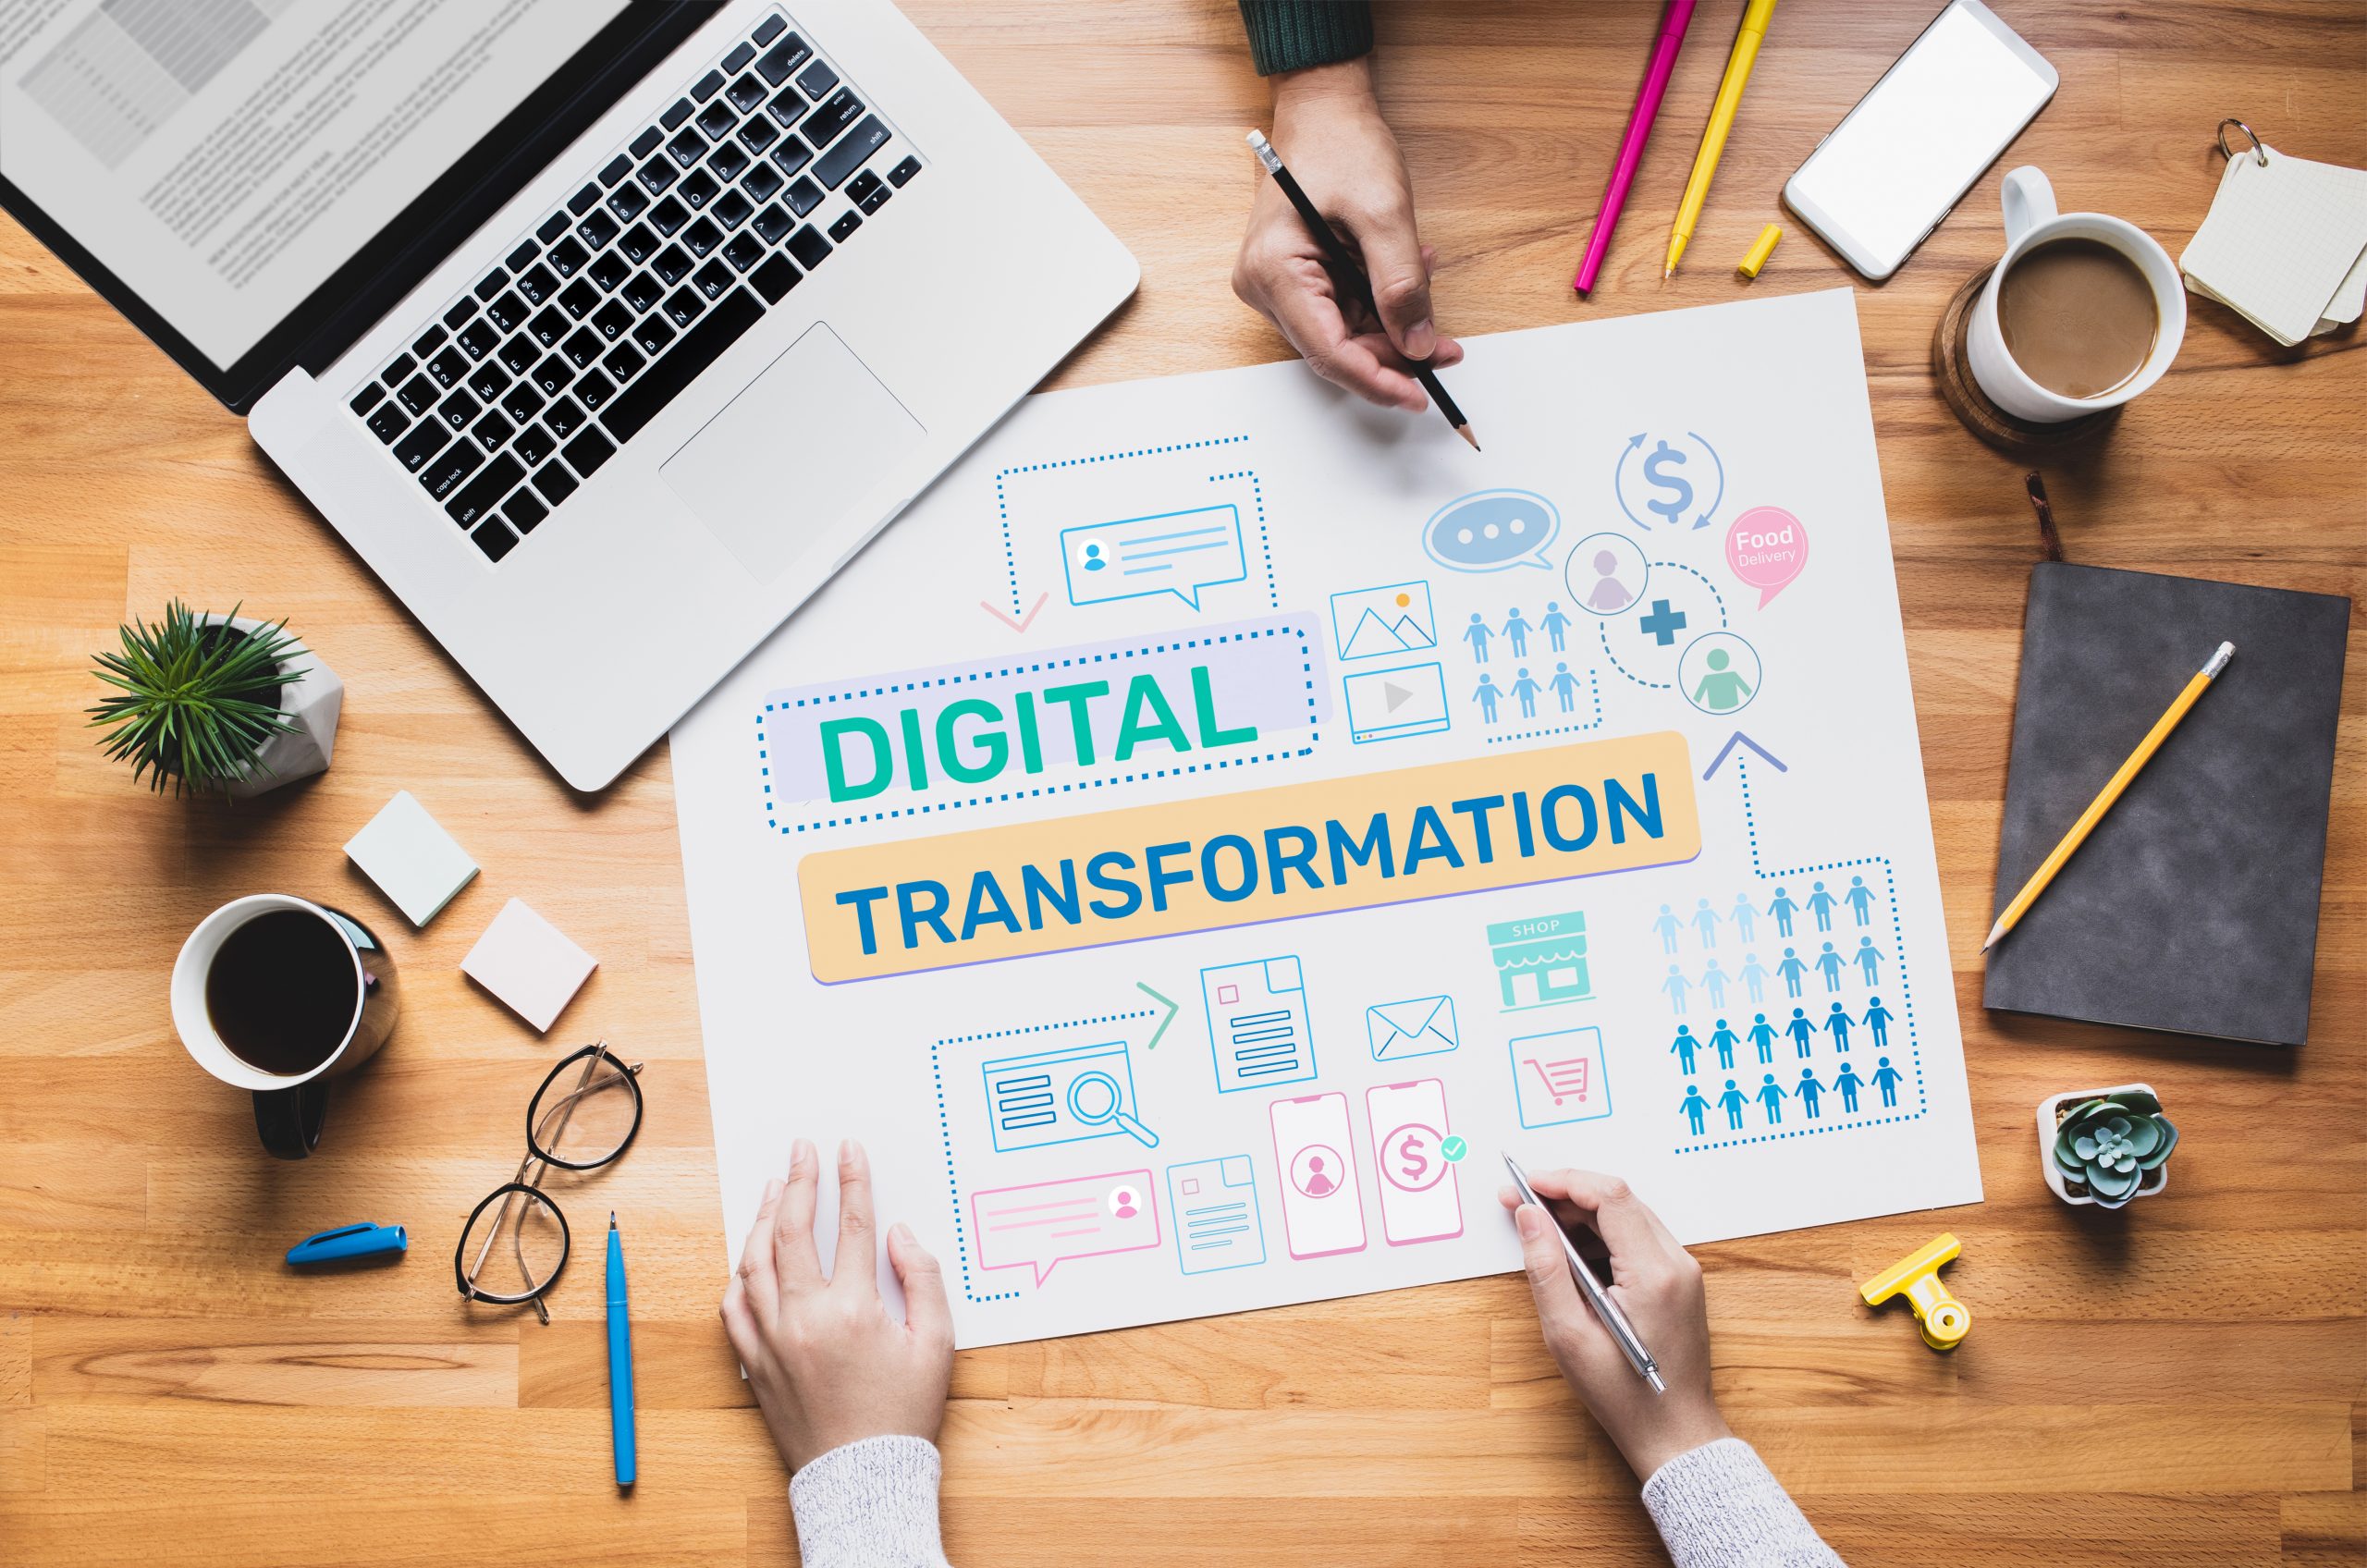 Small and Medium businesses need a digital transformation plan – Where’s yours?